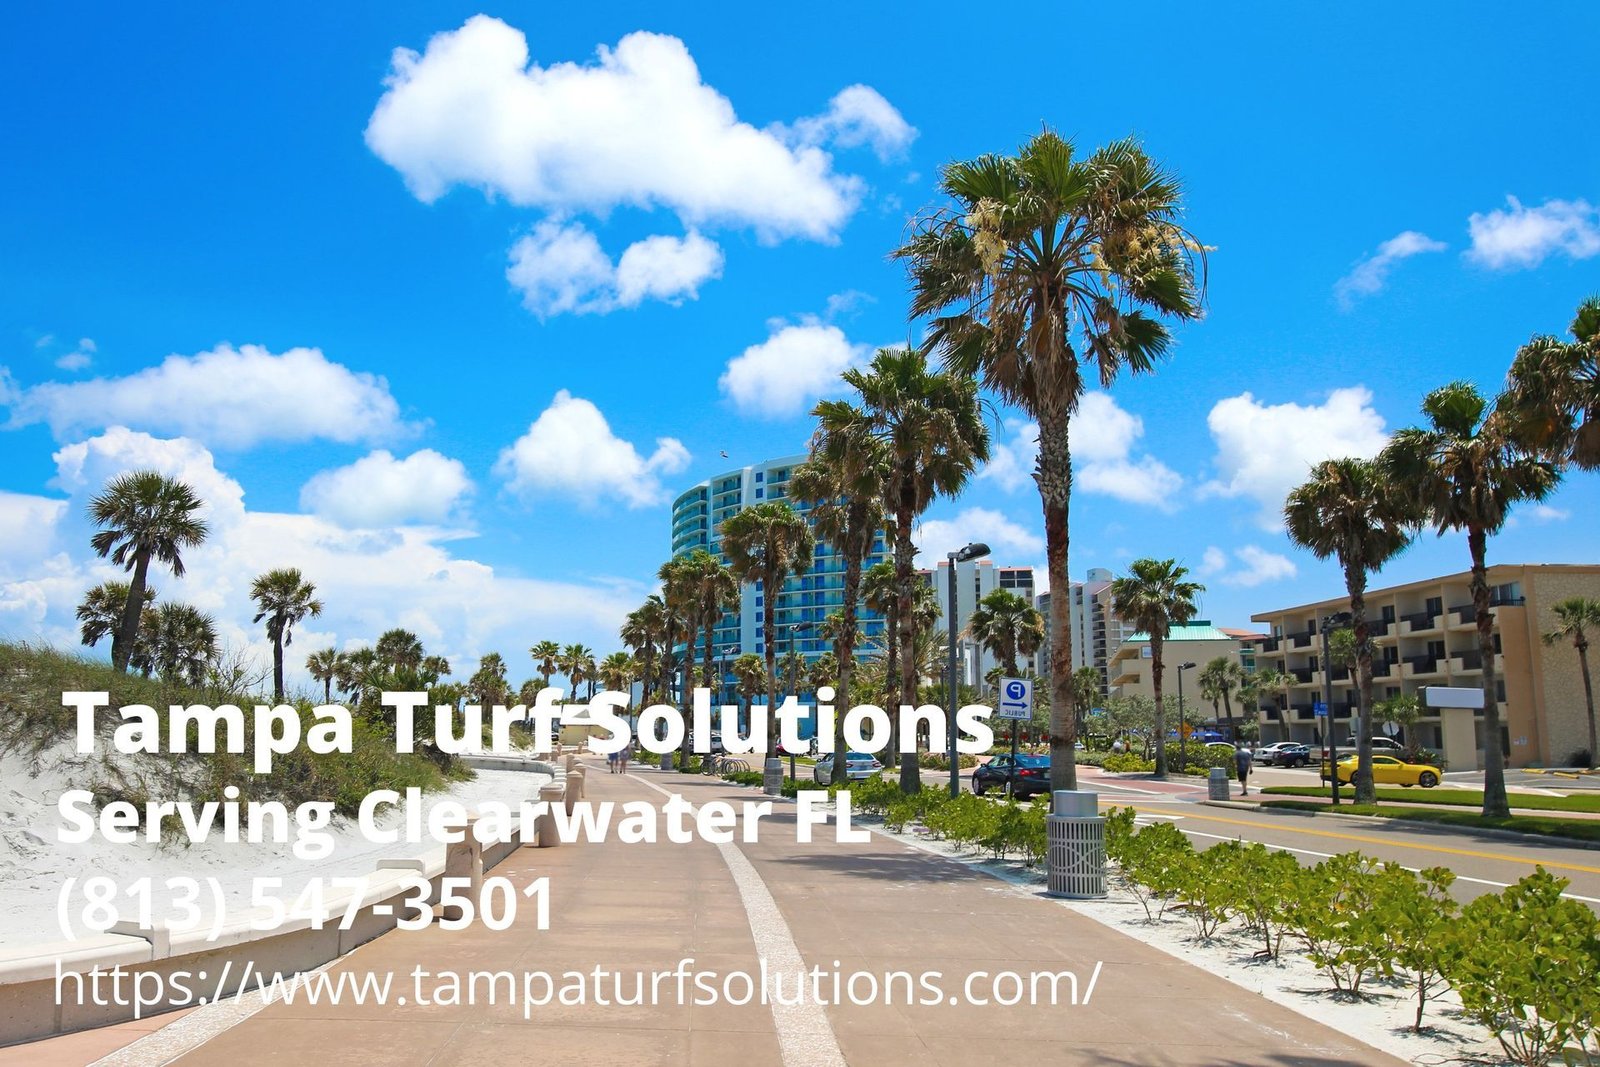 contact details of Tampa Turf Solutions - an artificial grass installation company serving Clearwater, FL